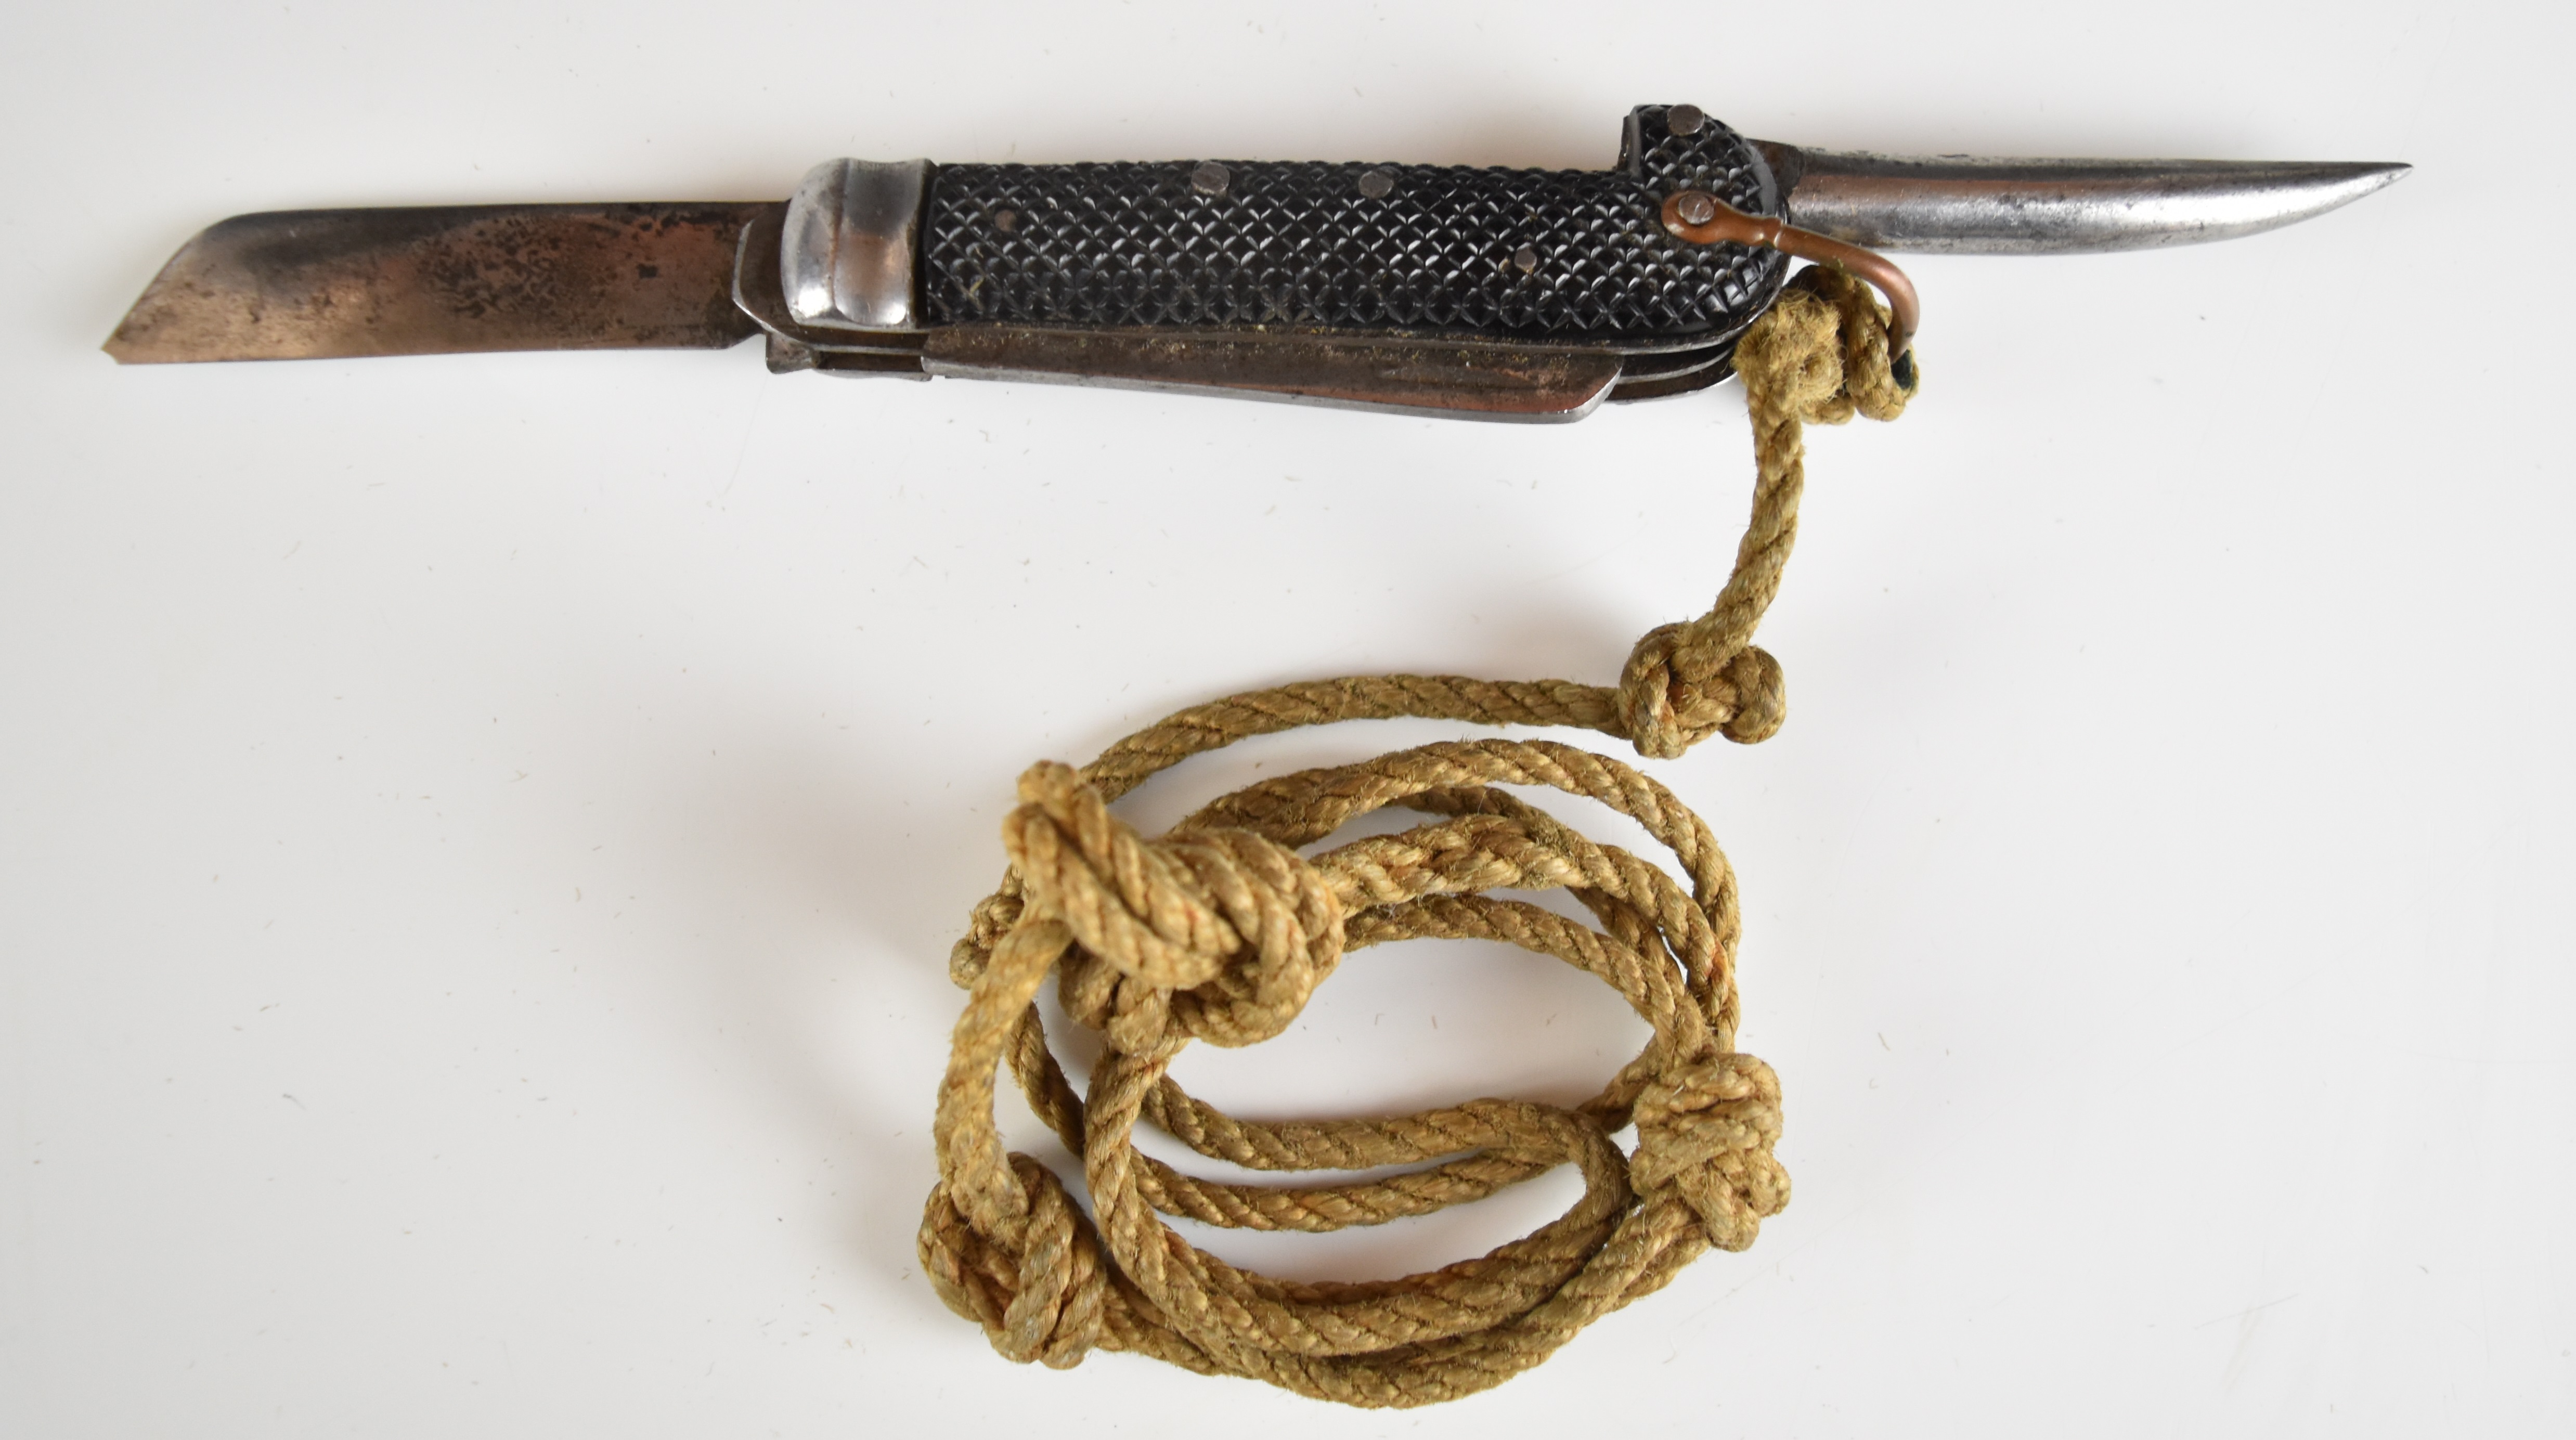 WW1 British Army clasp knife by E Tellin & Co, Sheffield, blade length 6cm, attributed to Pte